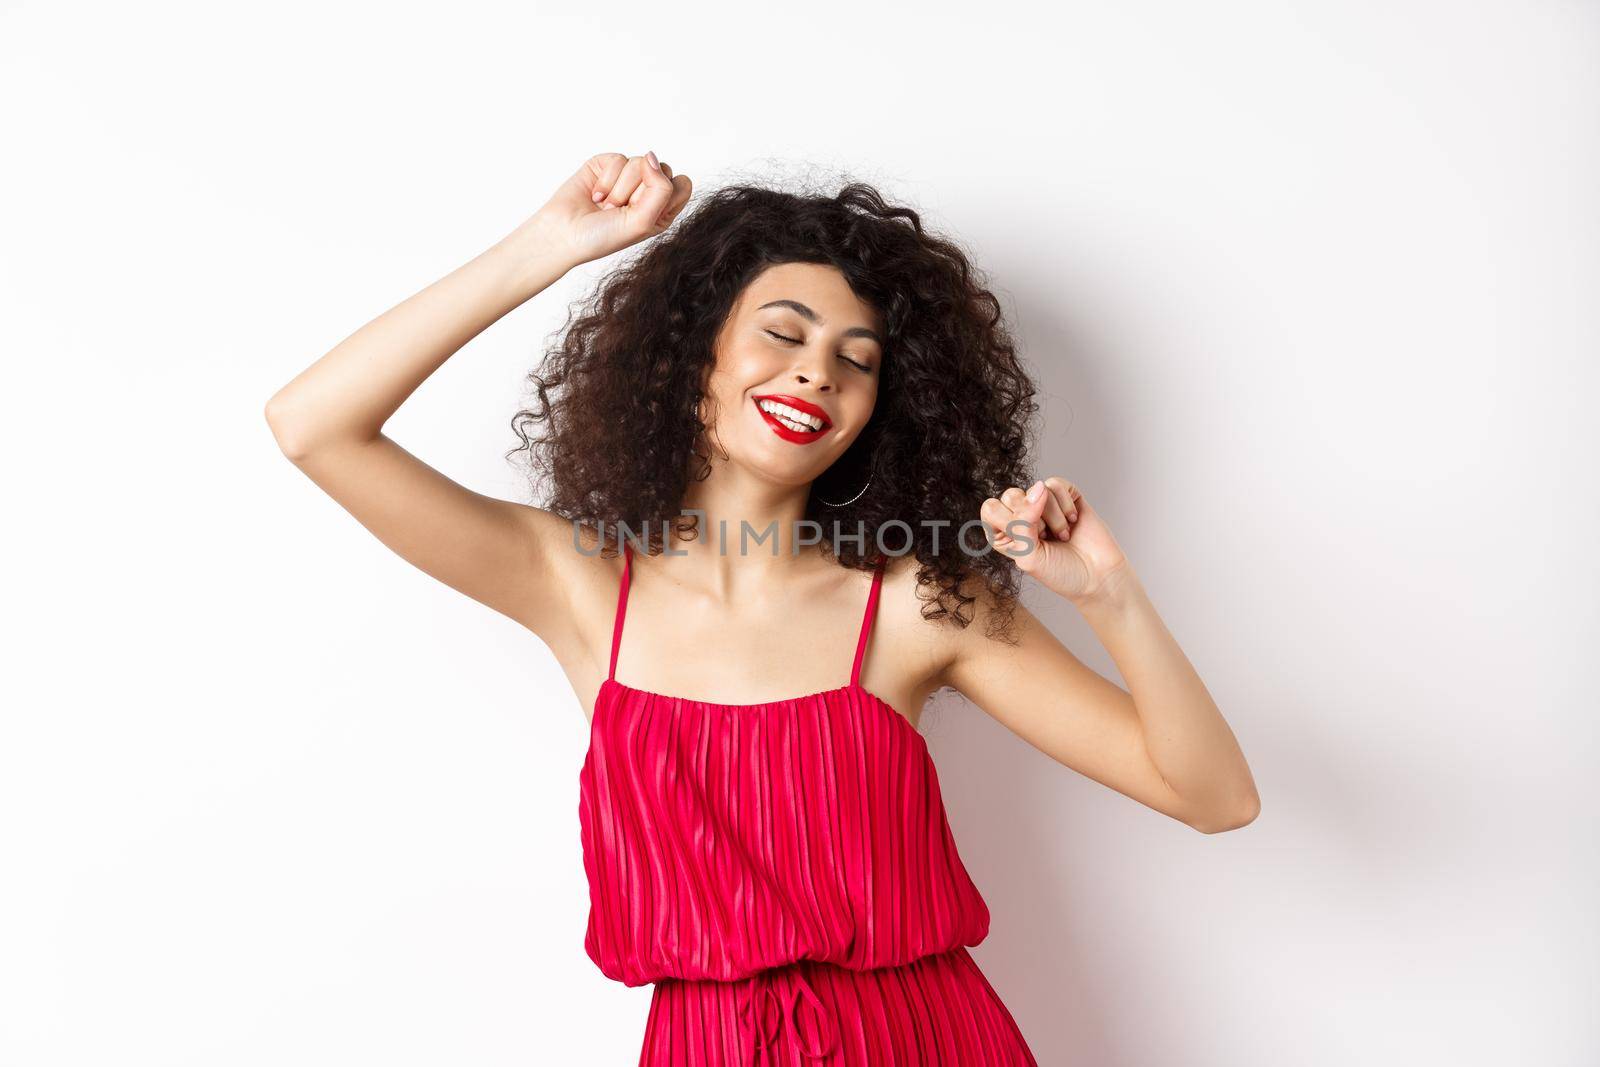 Happy elegant woman in red dress dancing on white studio background by Benzoix